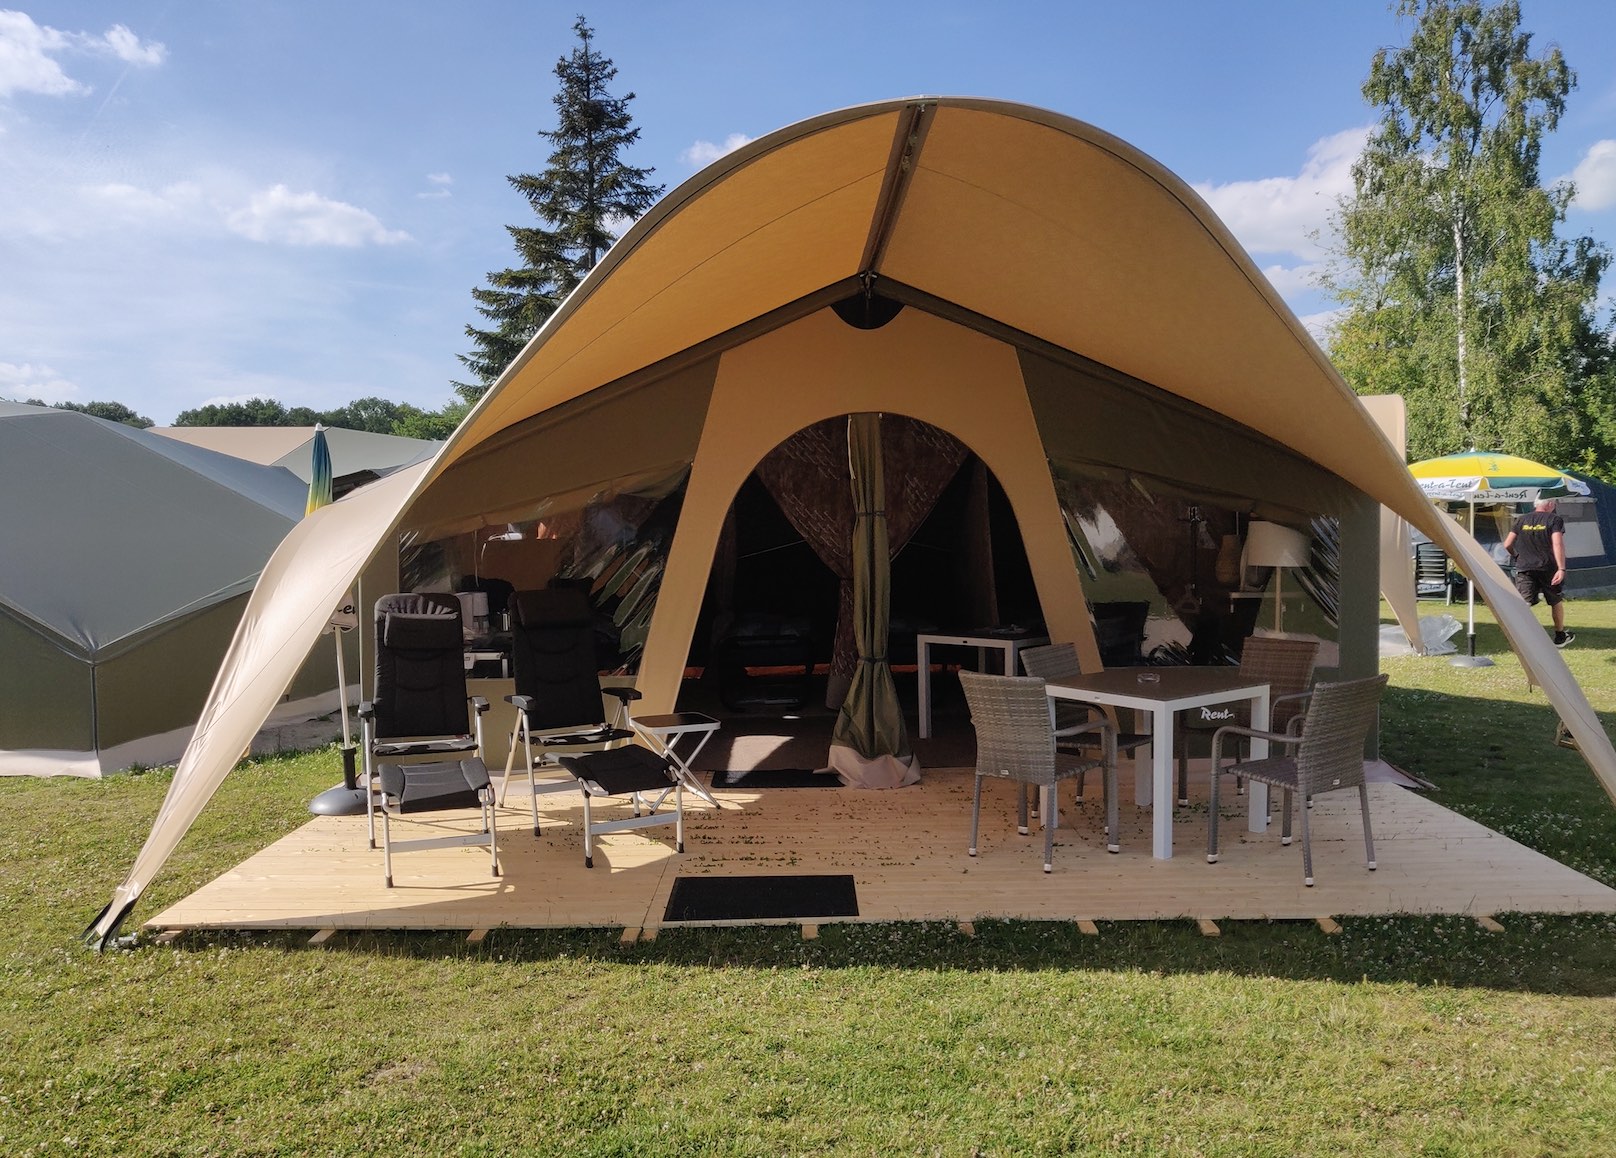 Duynlodge Rent-a-Tent